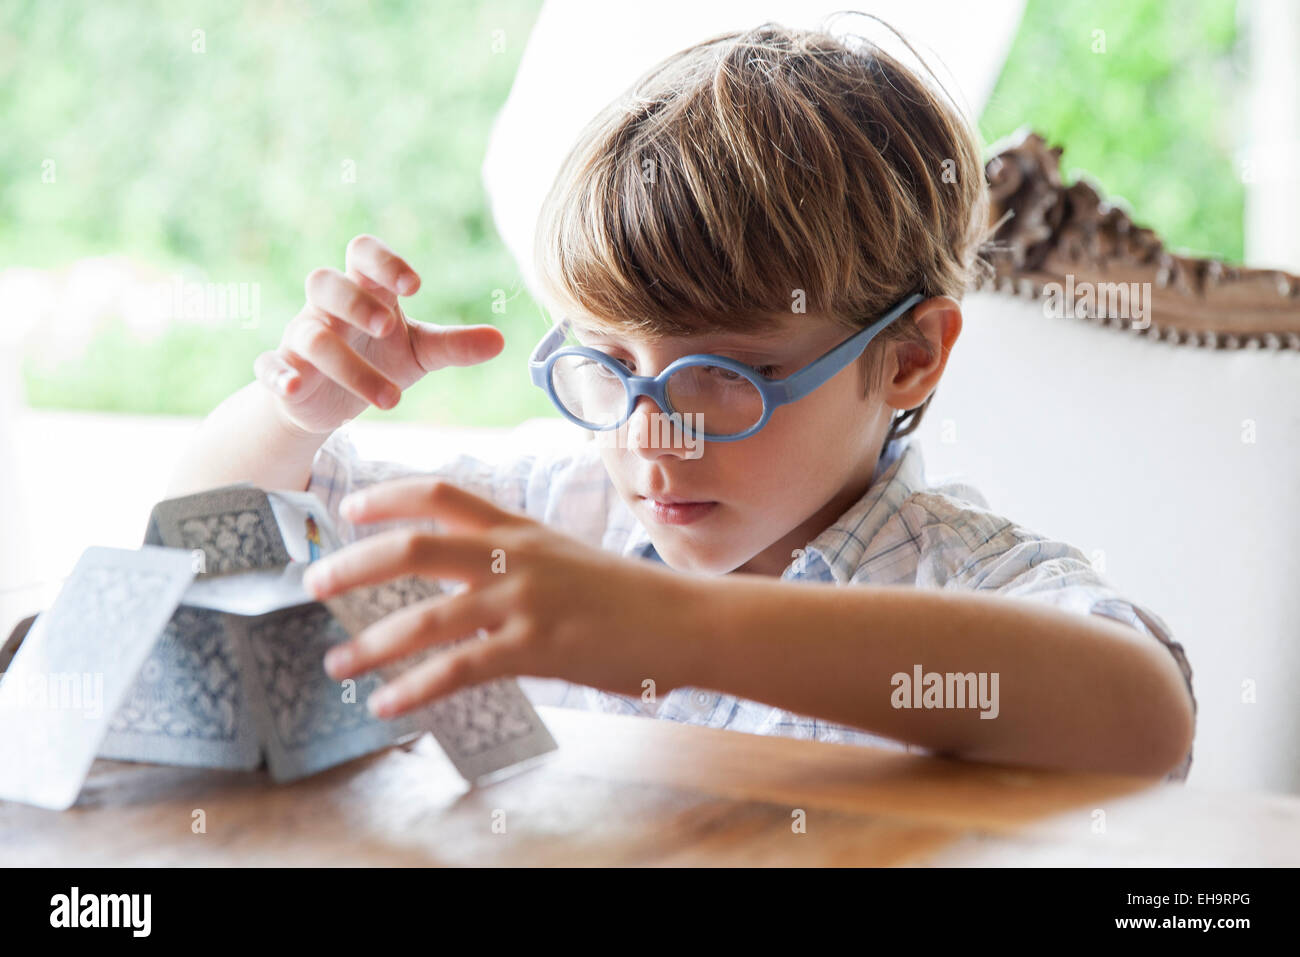 Little boy building house of cards Stock Photo